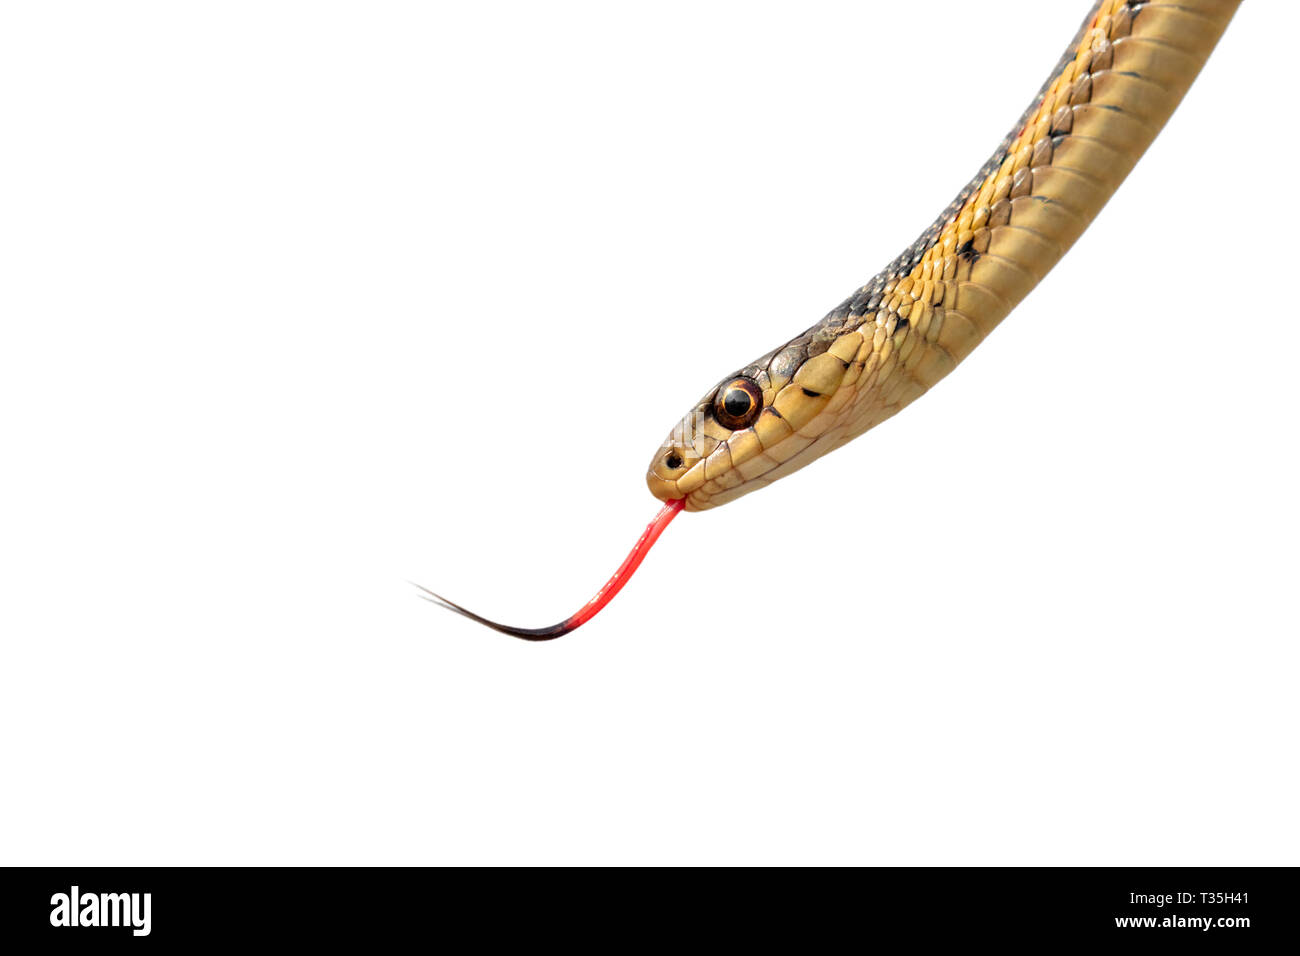 Common garter snake (Thamnophis sirtalis) with tongue out, isolated on white background, clipping path attached. Stock Photo